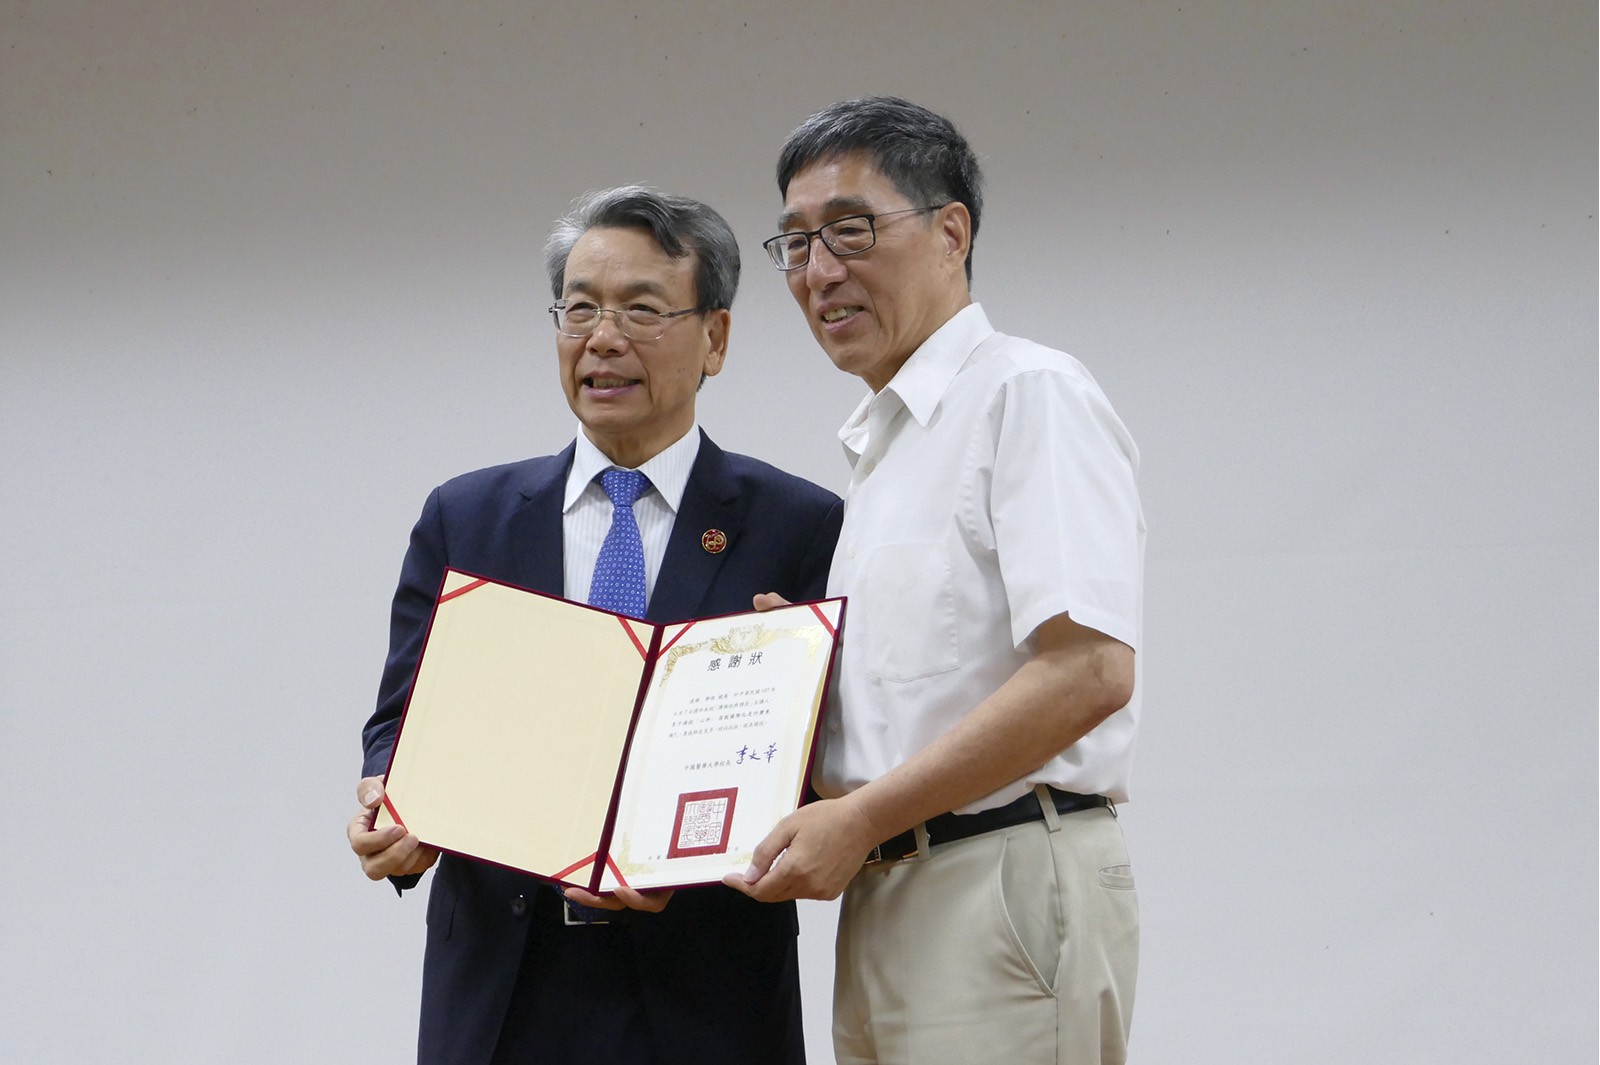 Professor Kuo (right) receives a certificate of appreciation from Professor Lee Wen-hwa, President of CMU.